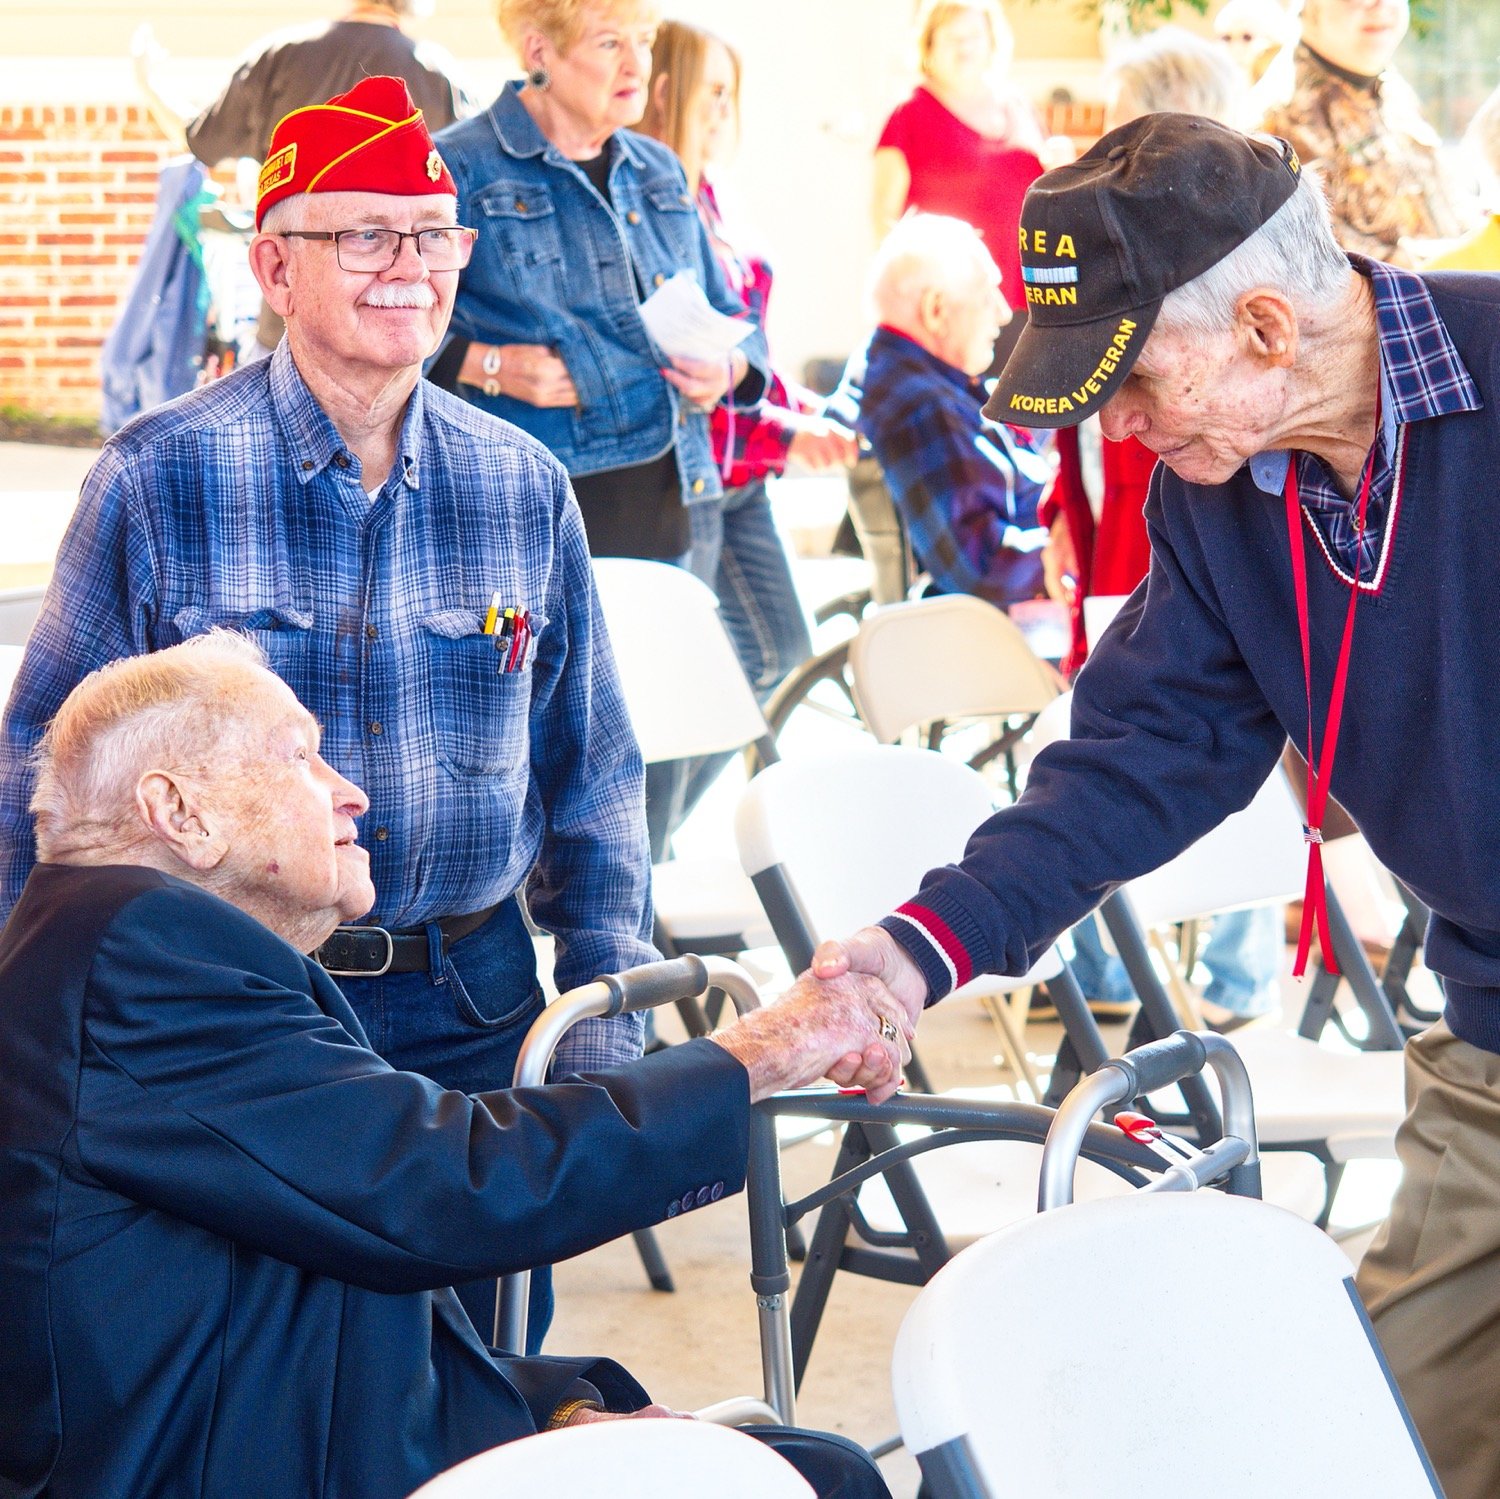 Jim "Coach" Armstrong (right) shakes the hand of James Krodel, who fought at Iwo Jima 77 years prior.